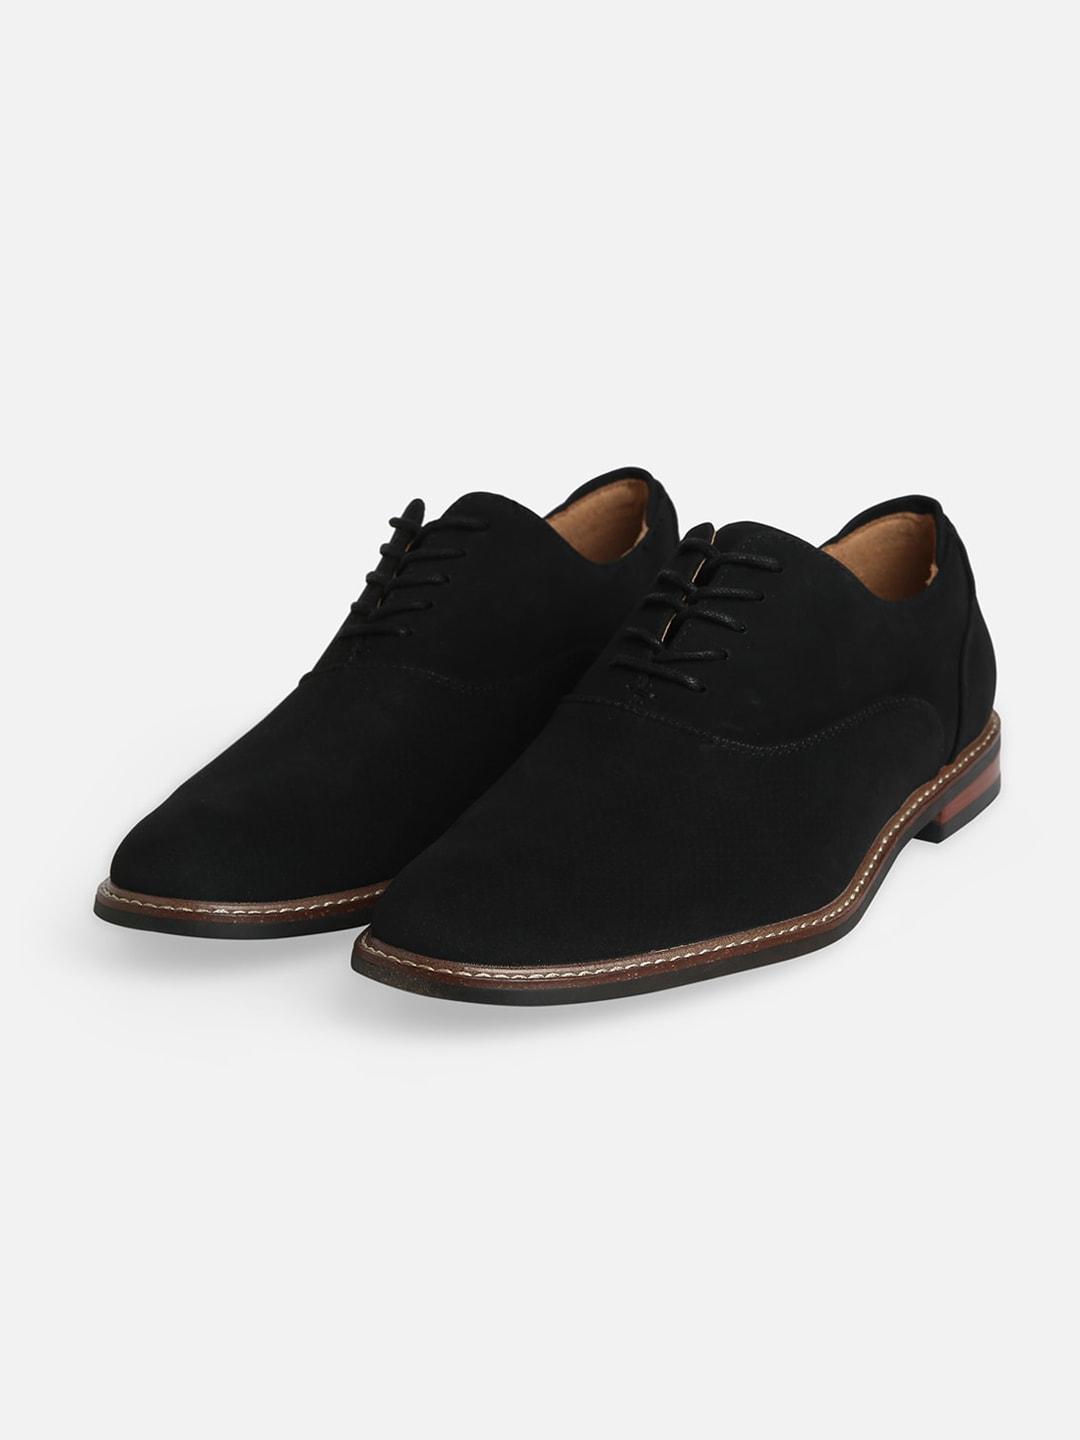 Call It Spring Men Formal Oxford Shoes